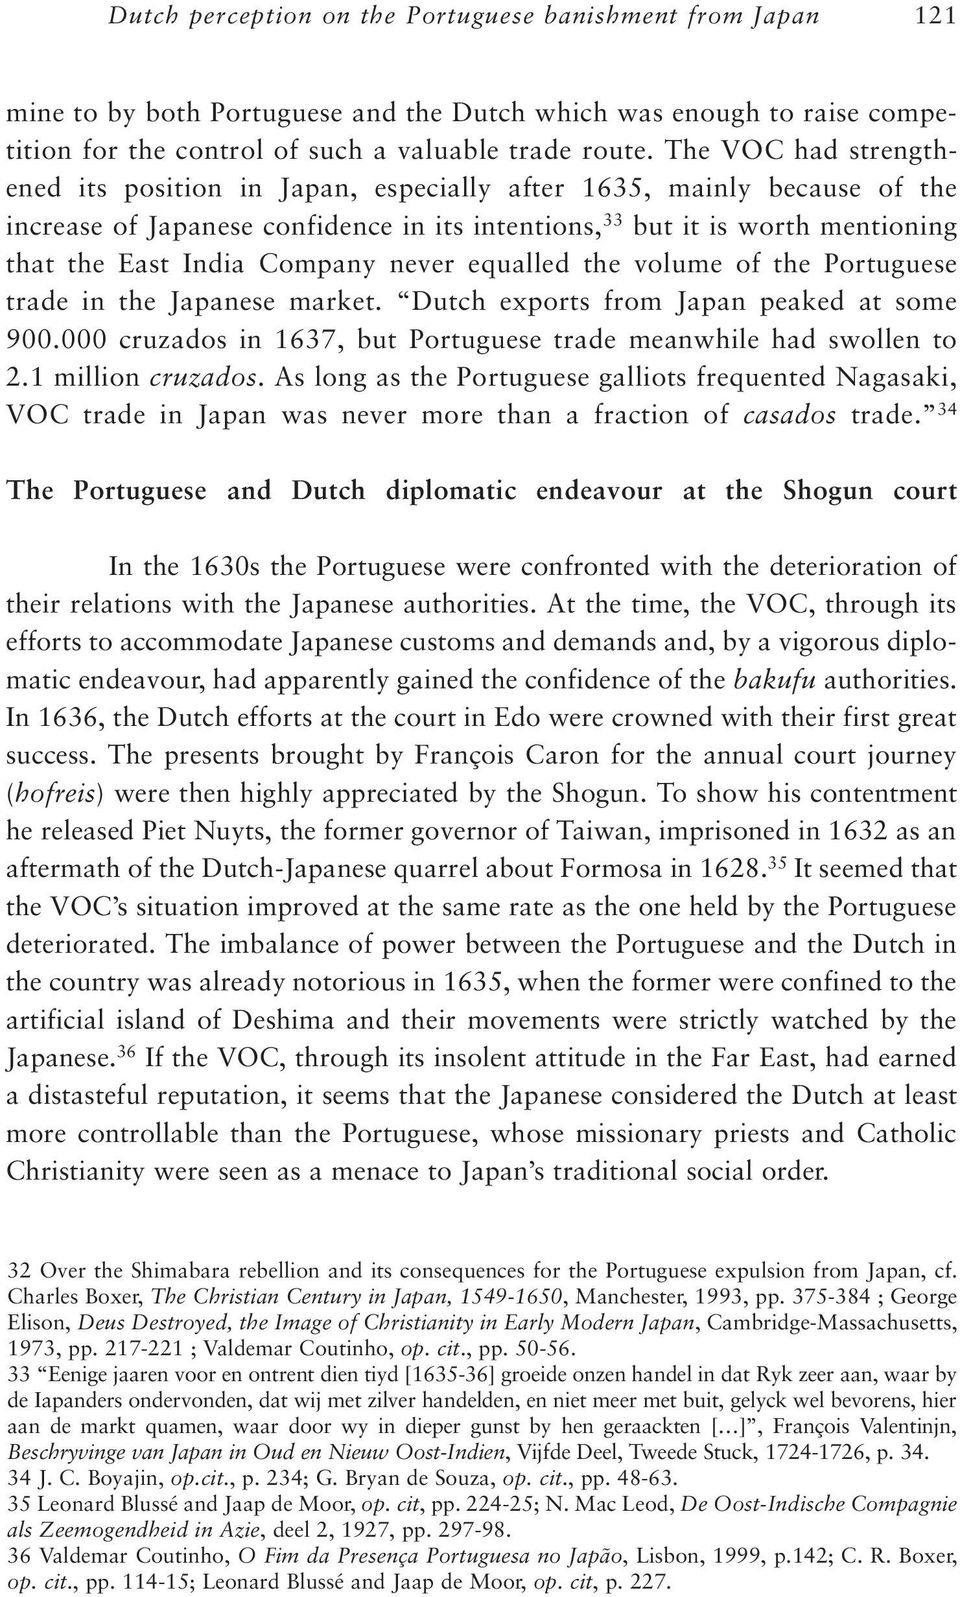 Company never equalled the volume of the Portuguese trade in the Japanese market. Dutch exports from Japan peaked at some 900.000 cruzados in 1637, but Portuguese trade meanwhile had swollen to 2.